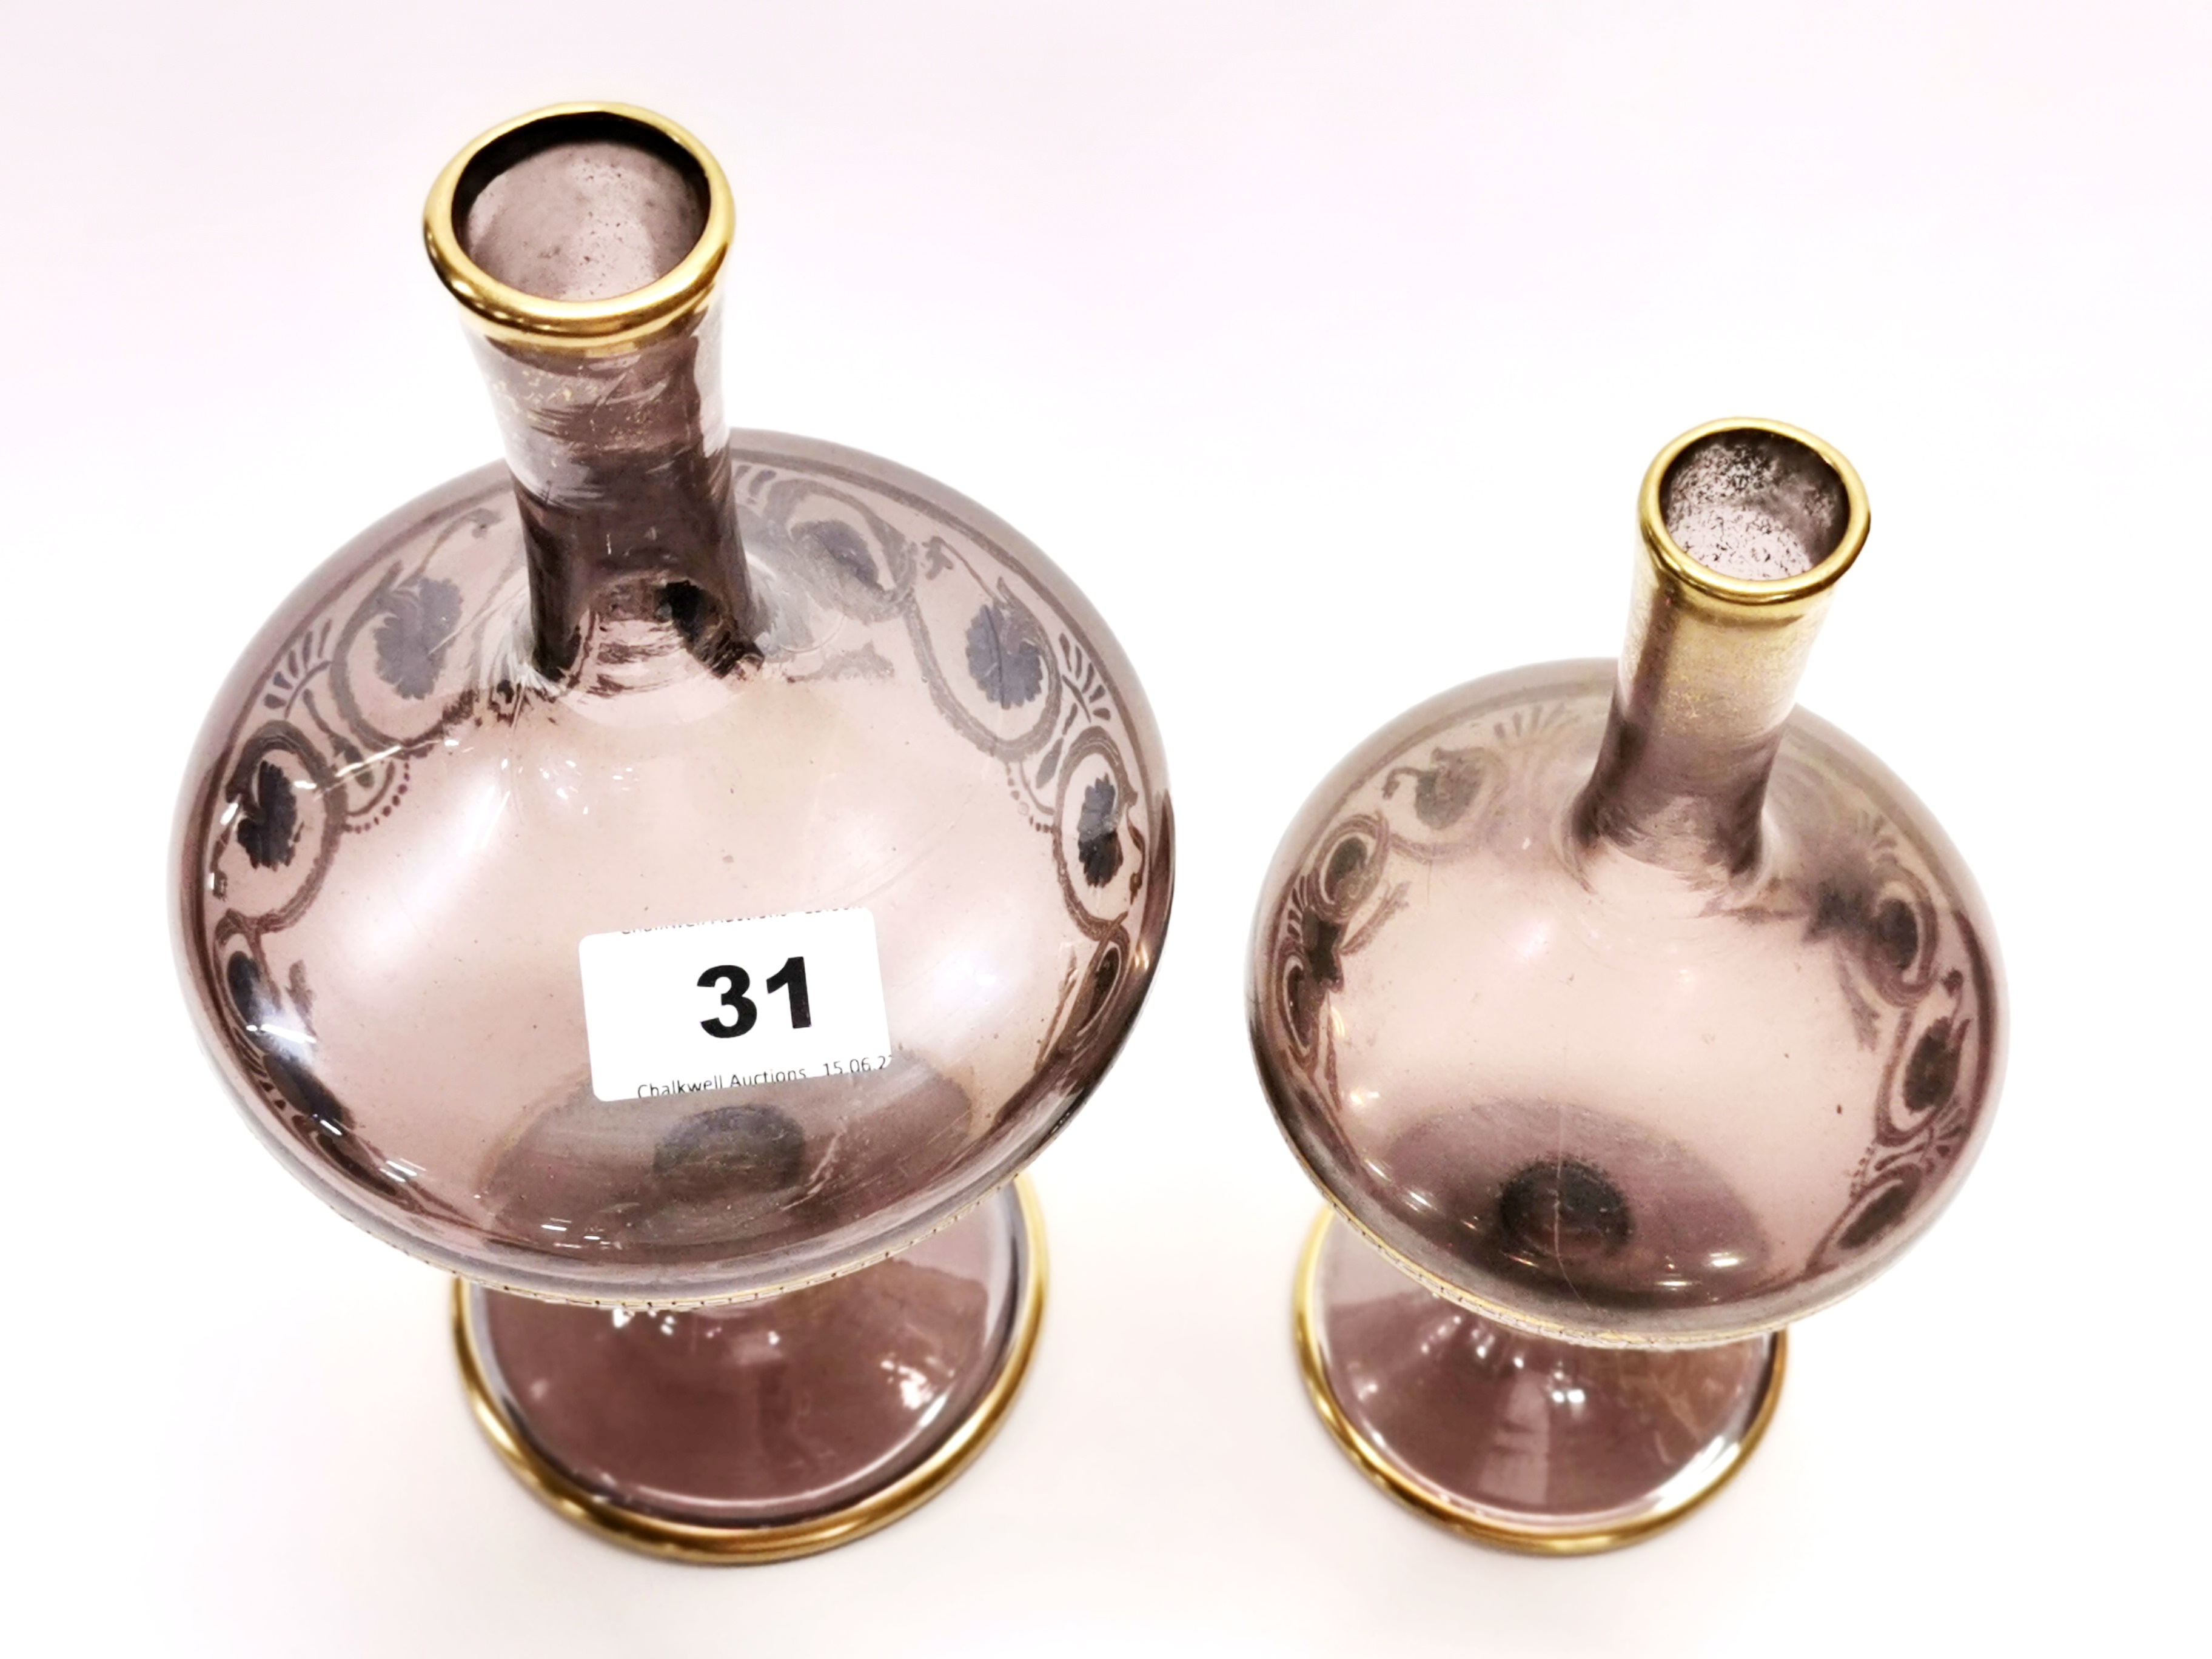 Two 19th century Venetian amethyst glass vases/ carafes, tallest H. 27cm. - Image 2 of 3